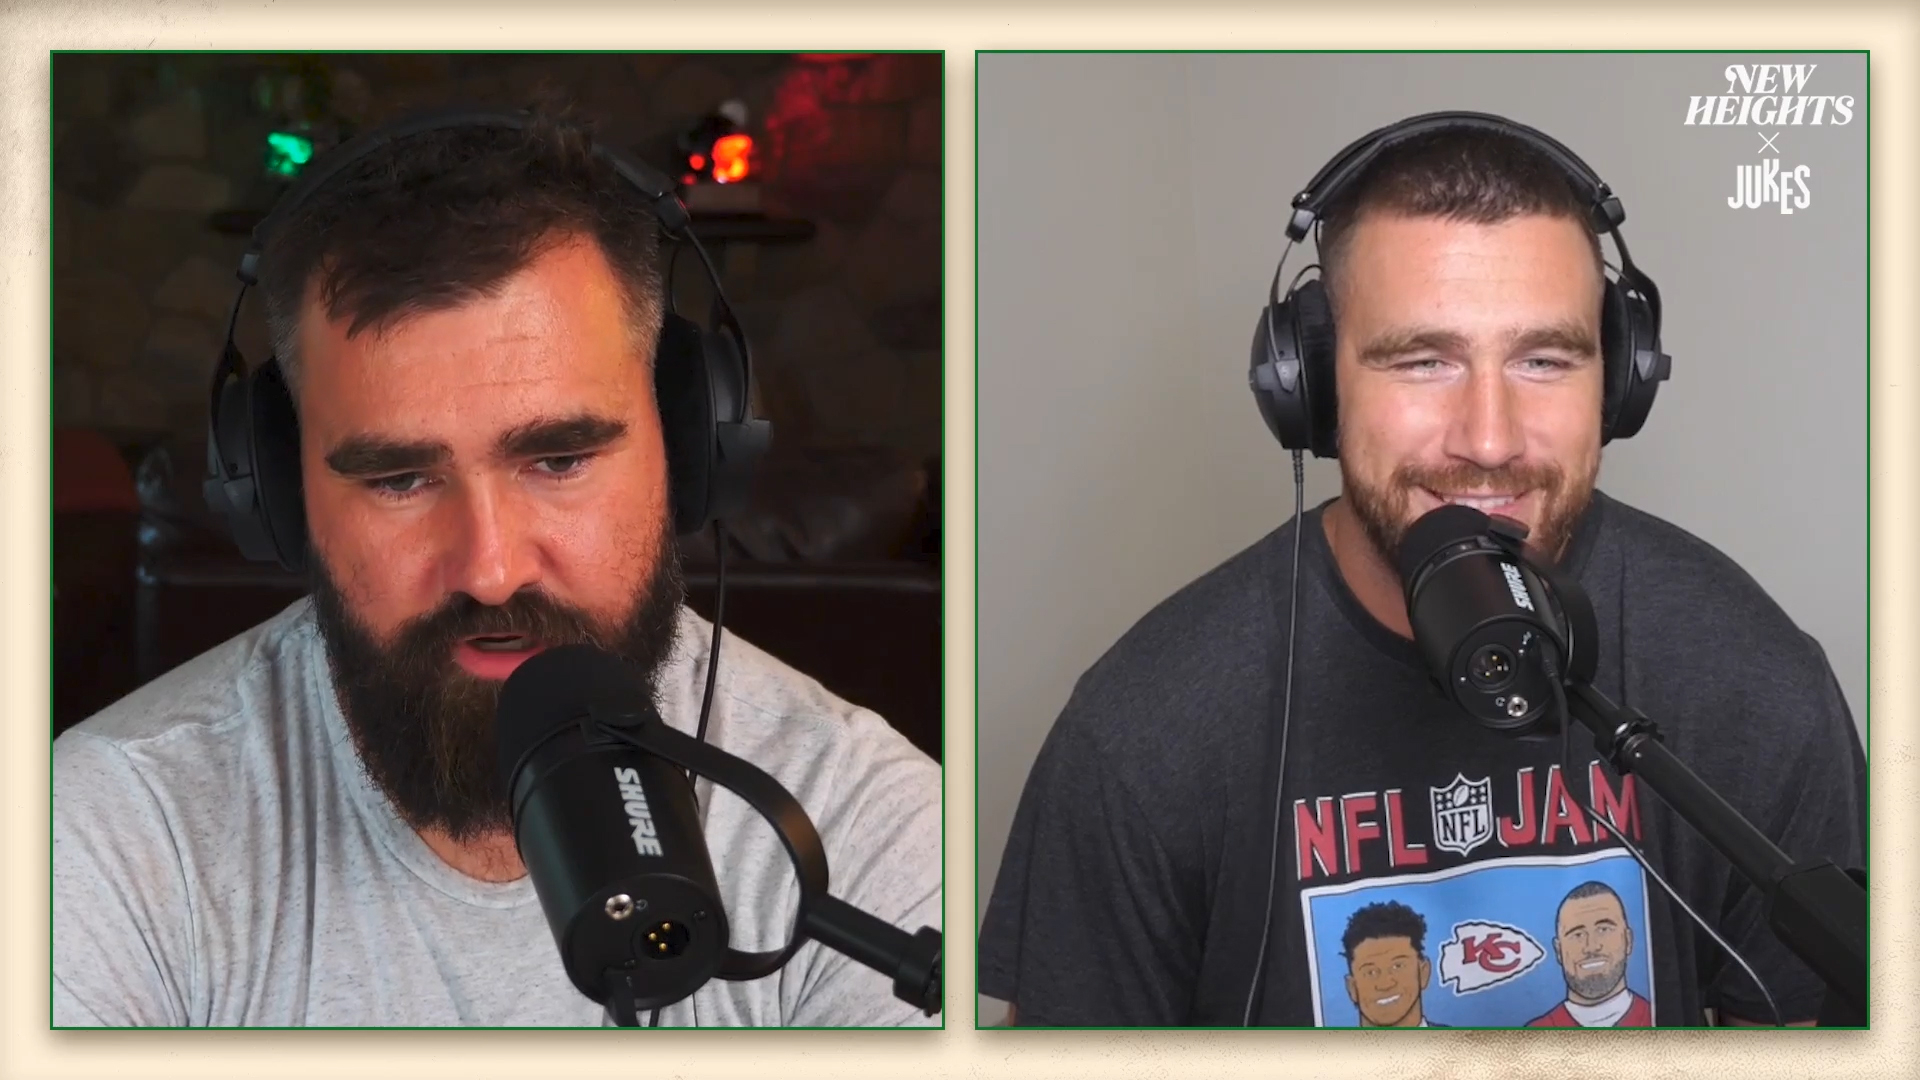 In this clip from the JUKES original "New Heights with Jason & Travis Kelce," Travis and Jason talk about the one chance they had to play together in the NFL: “Closest it was ever gonna be is the 2013 draft when the Eagles took Zach Ertz over me. I’m still butt hurt about it. We were both upset on draft night when that happened.” Episode 3 of "New Heights with Jason & Travis Kelce" is out now. Watch it on YouTube and listen to it on Apple, Spotify, and other major podcast platforms.